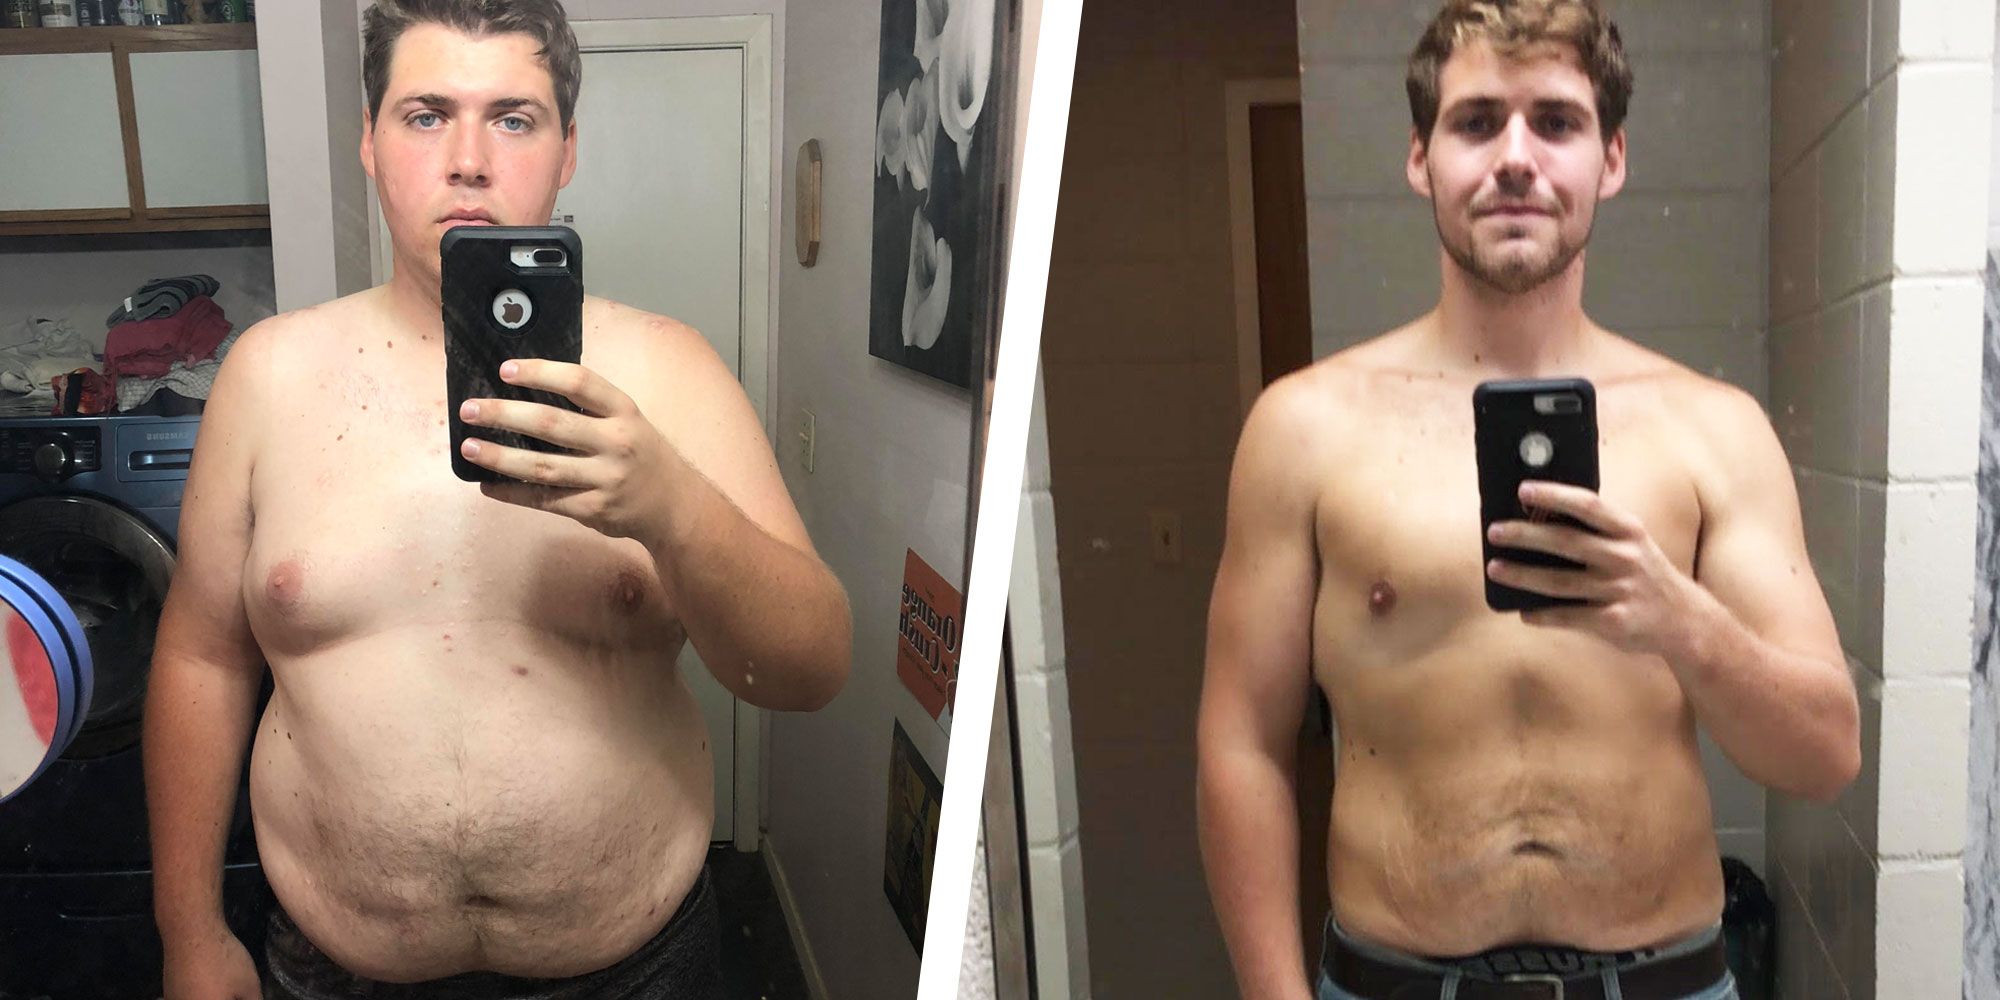 HIIT and Intermittent Fasting Helped Me Lose Over 100 Pounds